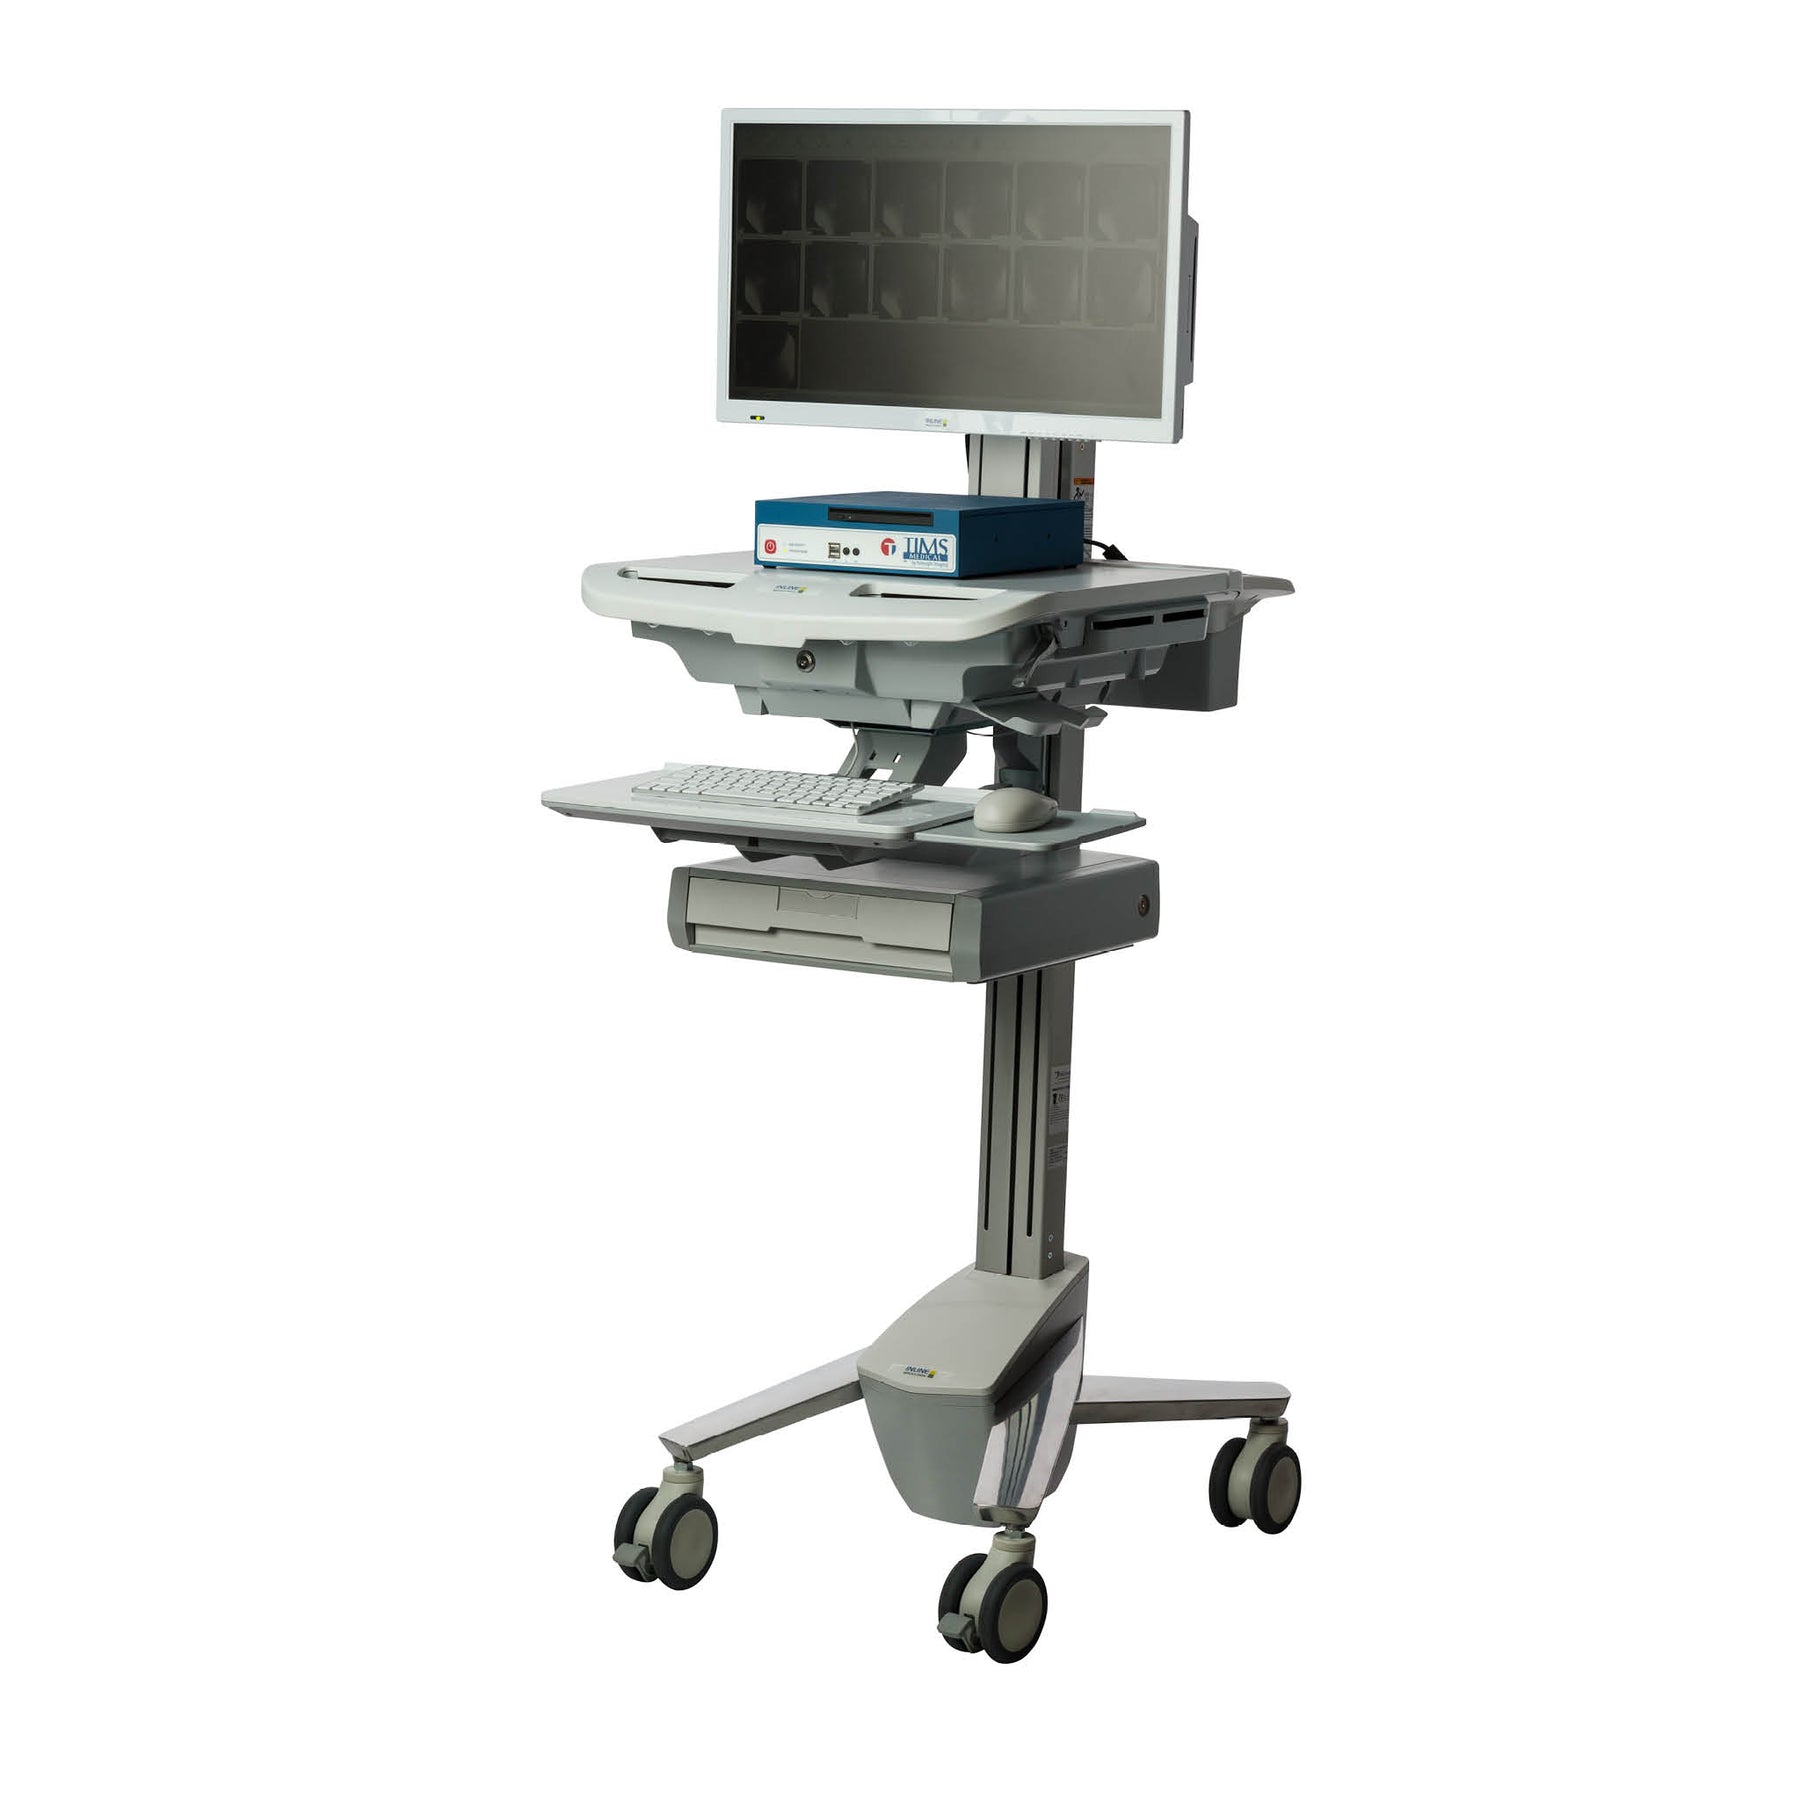 TIMS MVP (Medical Video Platform) recording solution on a stand.